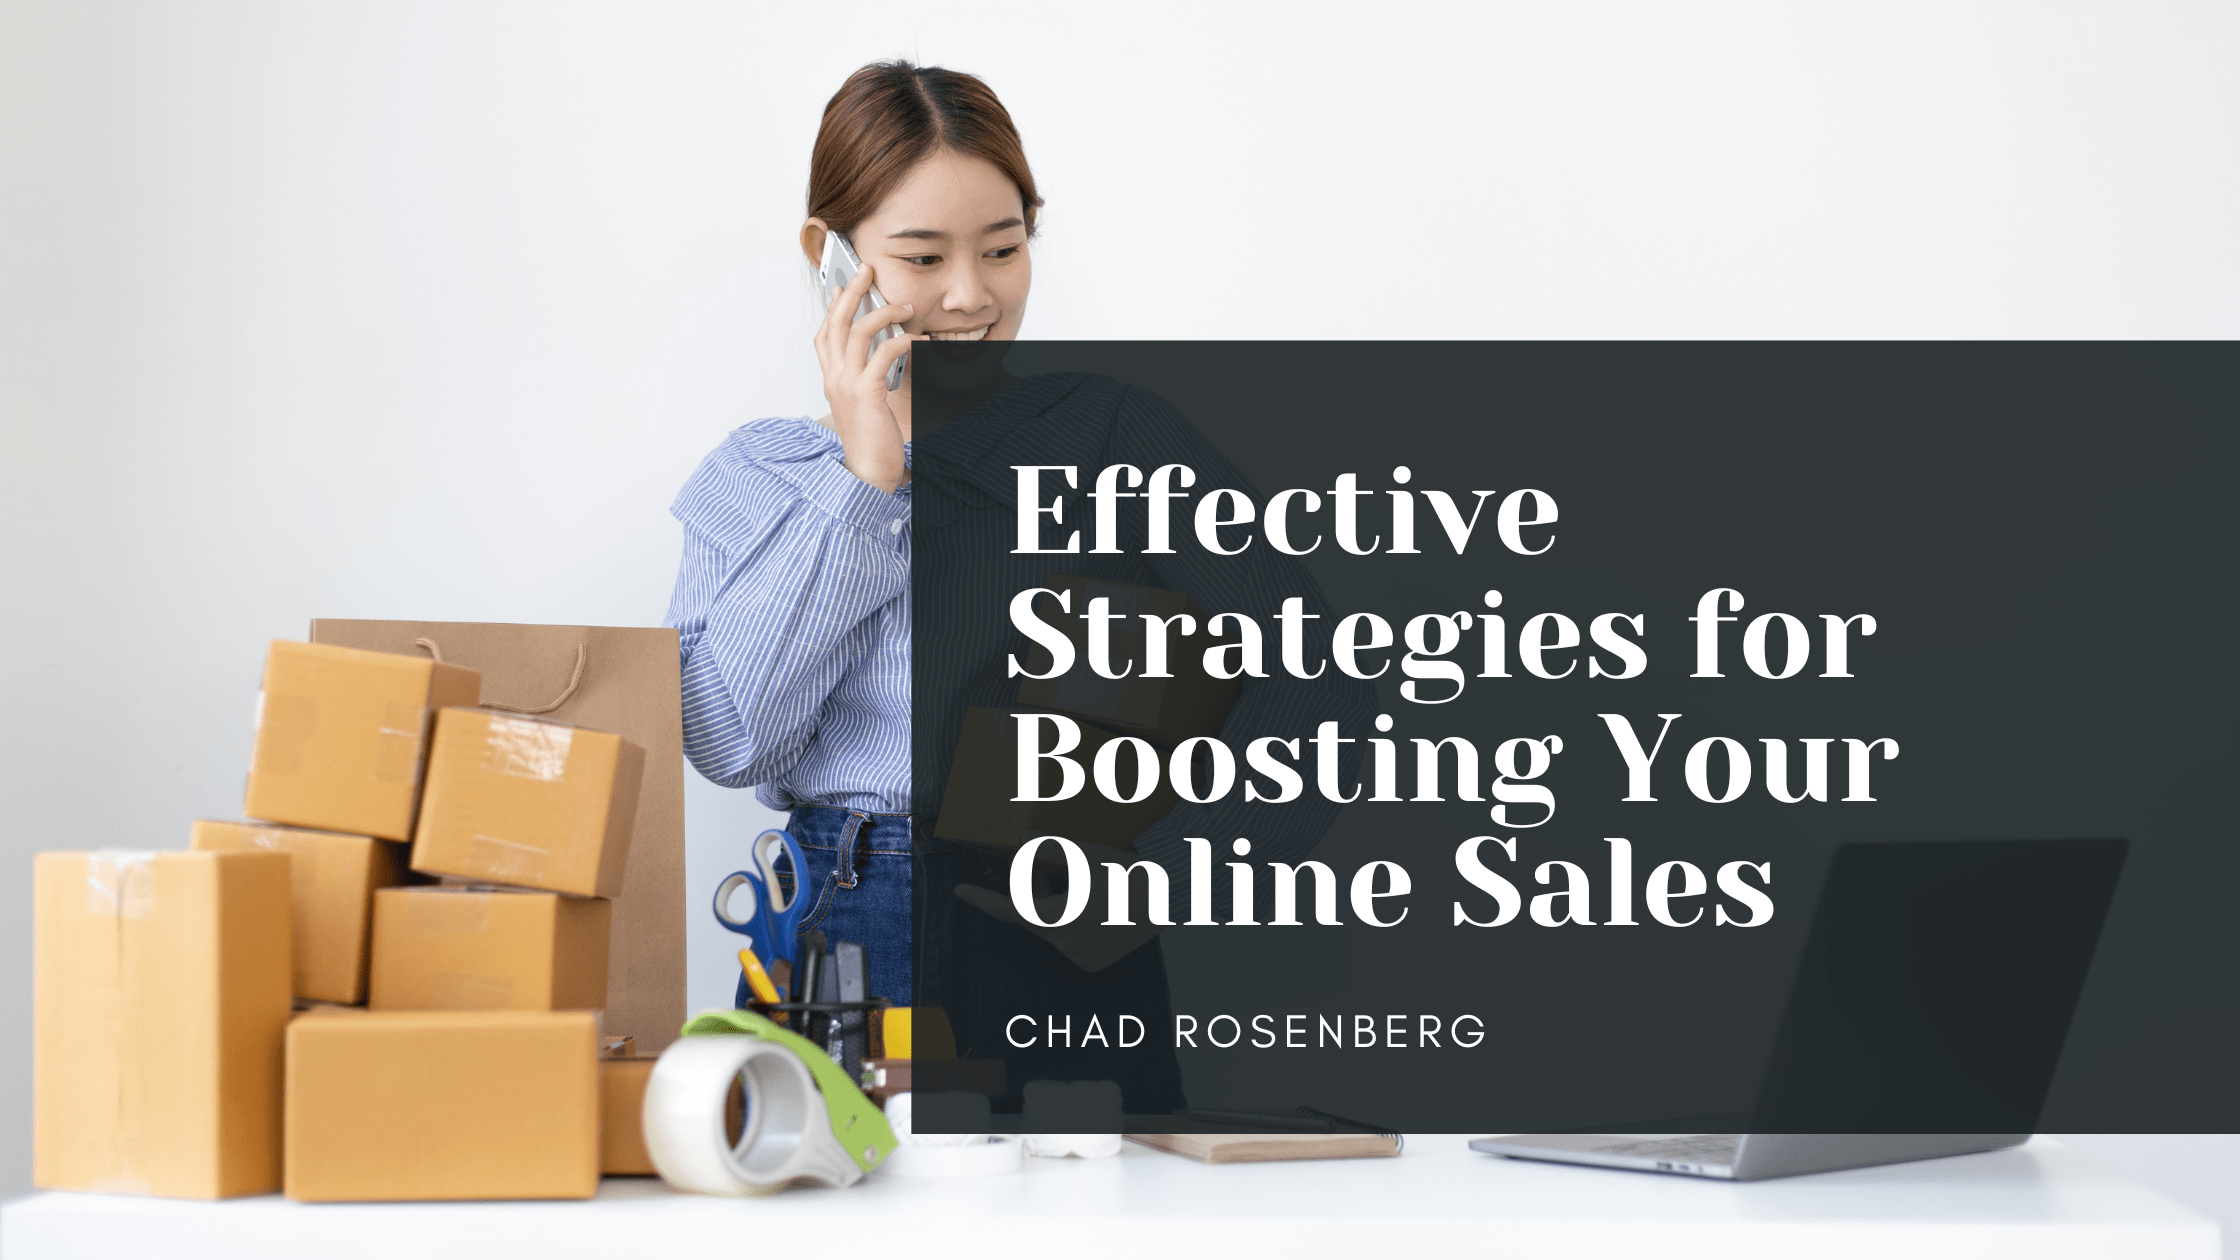 Chad Rosenberg - Effective Strategies for Boosting Your Online Sales-min